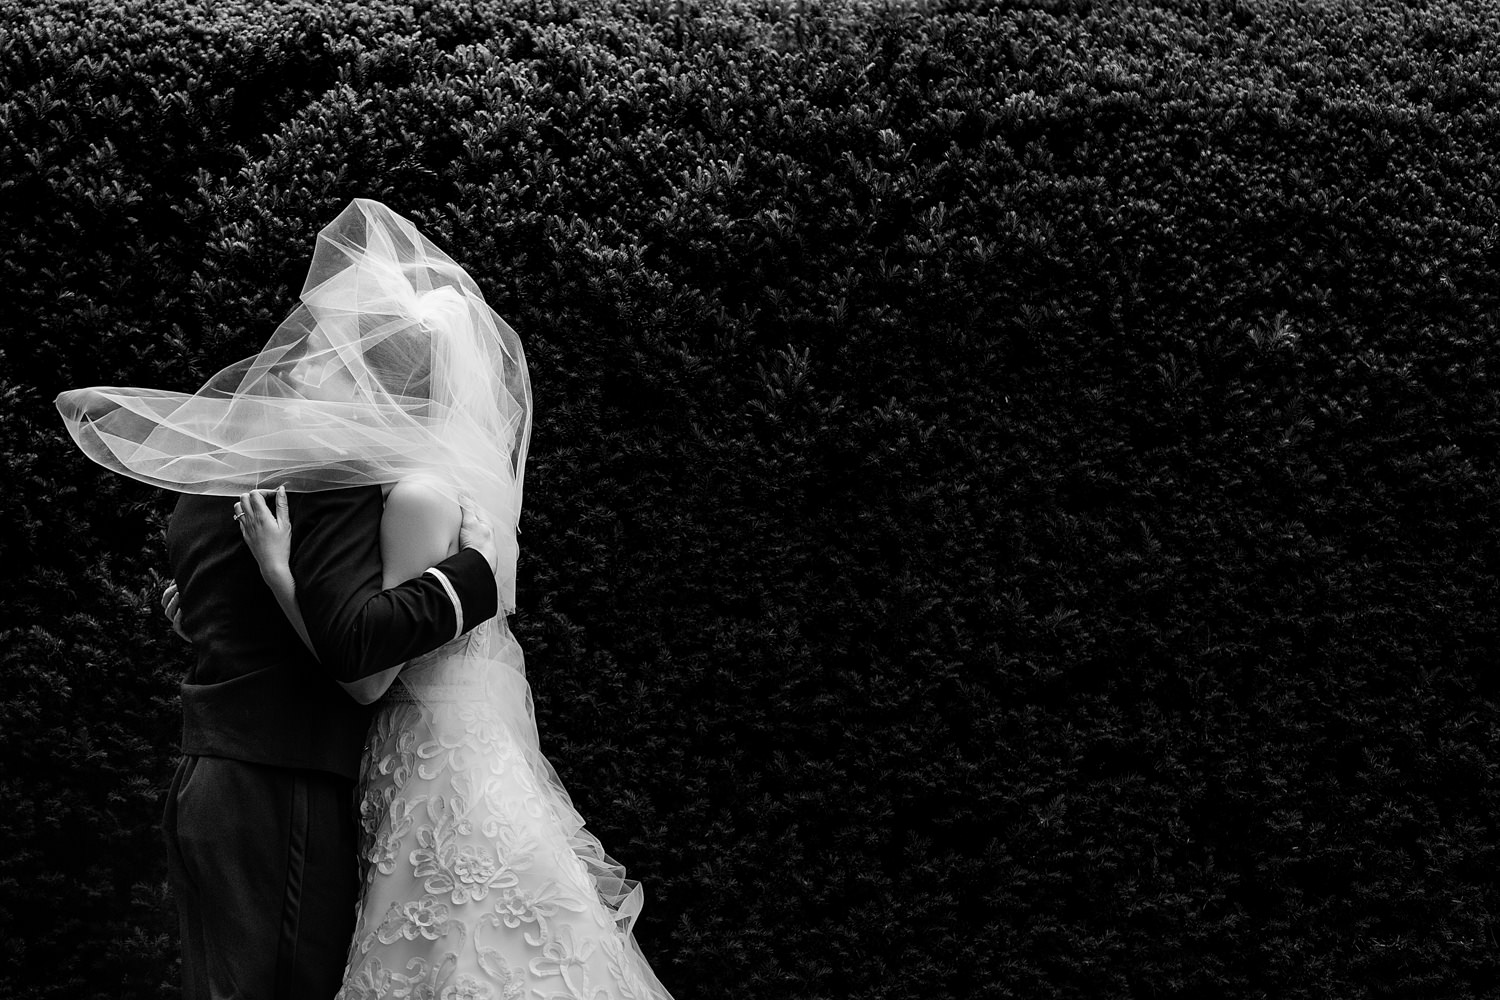 This was at an electric first look, The two didn't stop hugging even when a giant gust of wind blew the bride's veil over her head, This black and white photo is of the couple embracing in front of a foliage background, It is a minimal image with maximum effect, striking, Catching the moment, Procopio Photography, best top Washington DC photographer, best top Maryland photographer, best top Virginia photographer, best top DMV photographer, best top wedding photographer, best top commercial photographer, best top portrait photographer, best top boudoir photographer, modern fine art portraits, dramatic, unique, different, bold, editorial, photojournalism, award winning photographer, published photographer, memorable images, be different, stand out